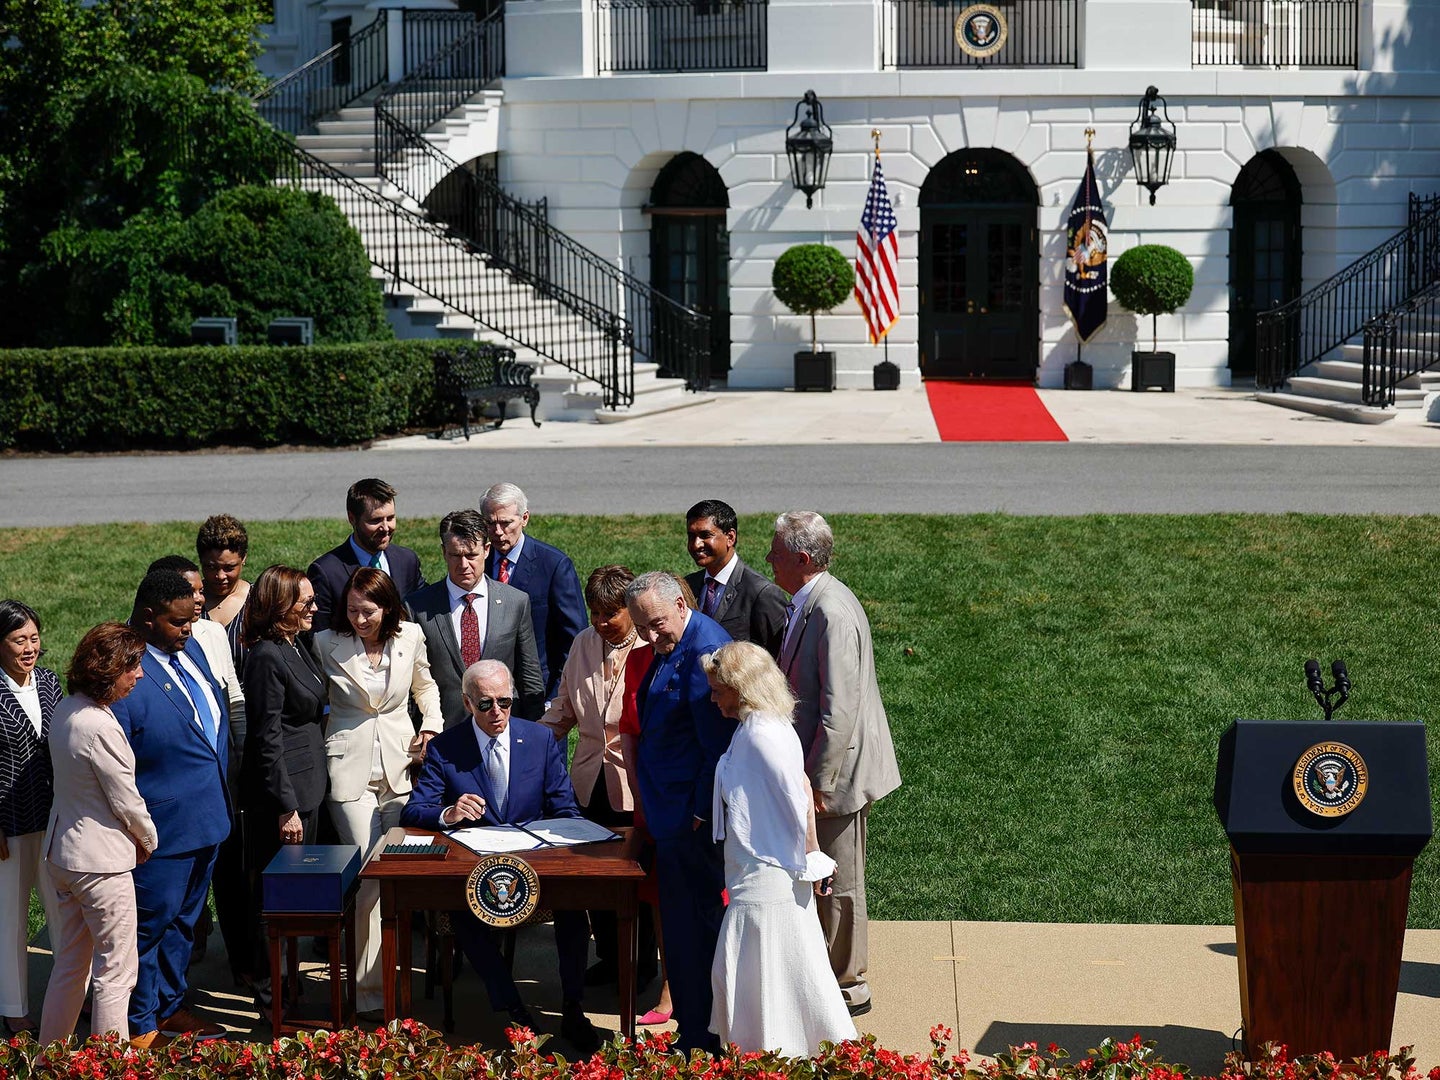 U.S. President Joe Biden signs the CHIPS and Science Act of 2022 during a ceremony on the South Lawn of the White House on August 9, 2022 in Washington, DC.